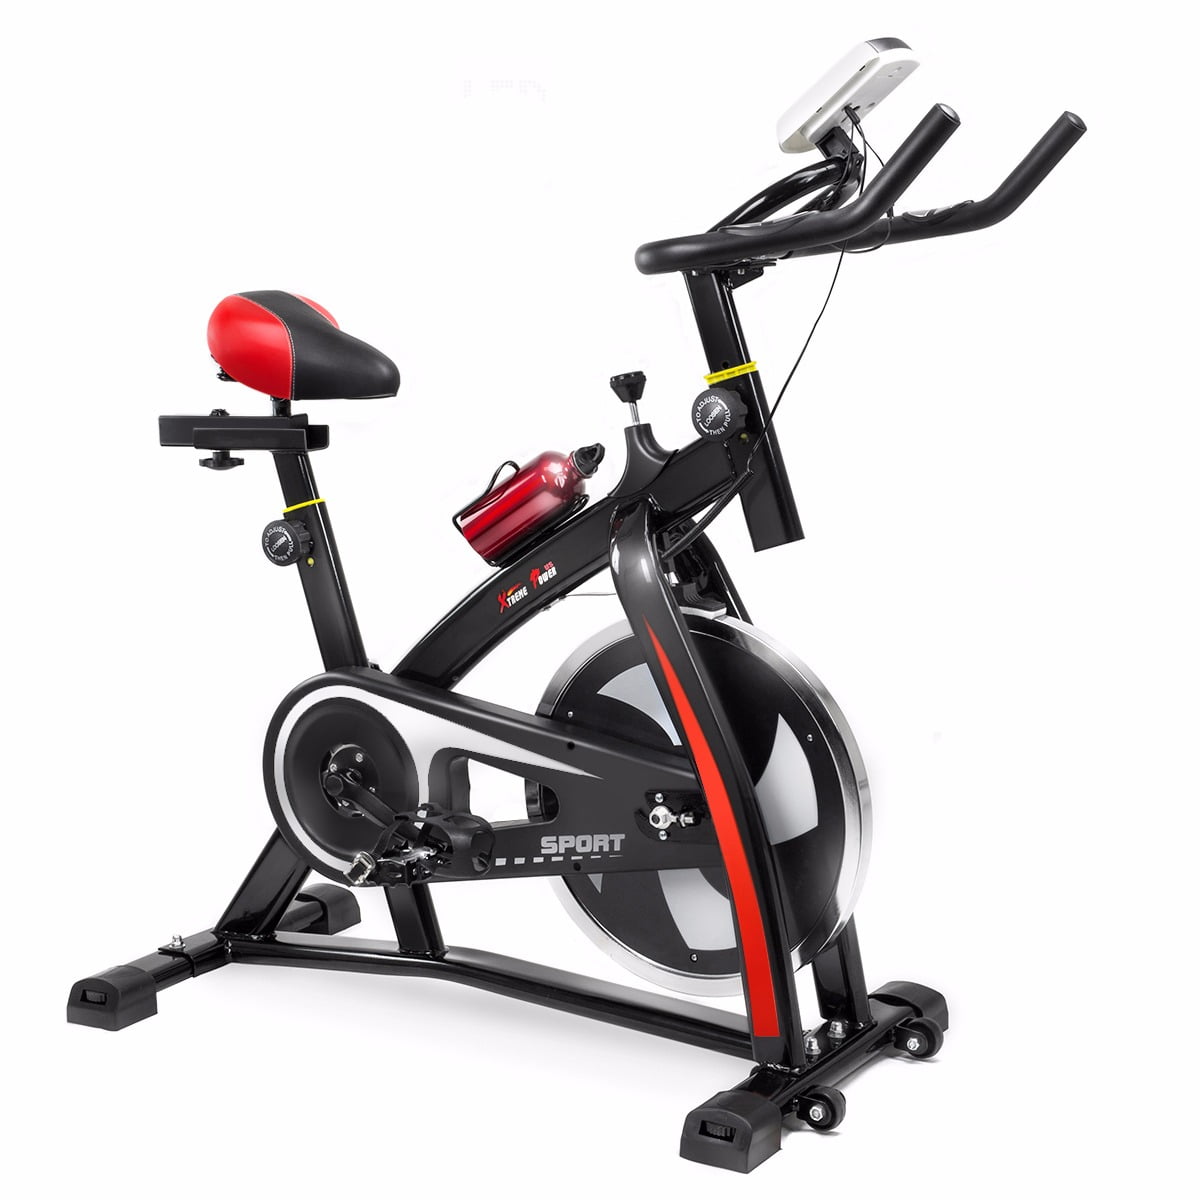 Details about   Stationary Exercise Bicycle Indoor Bike Cardio Health Cycling Home Fitness 330LB 